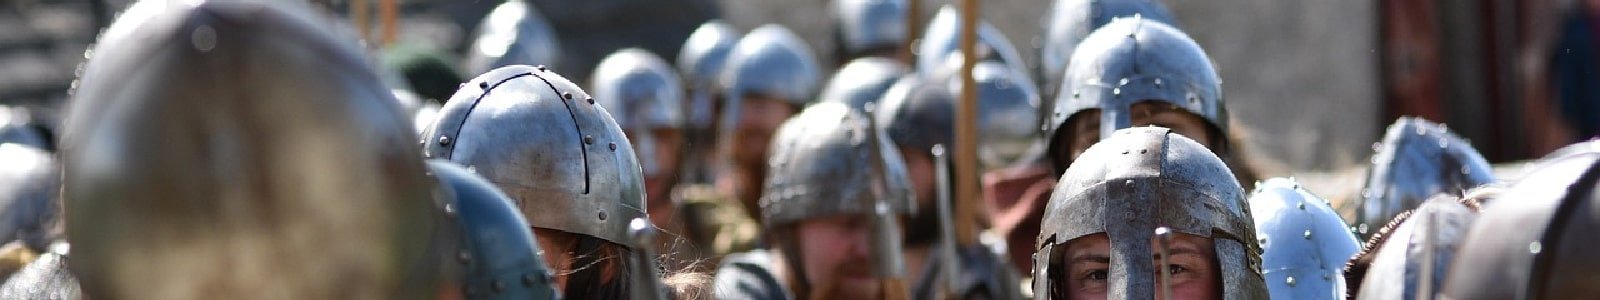 The Mighty Defense: Exploring the Design and Functionality of Viking Shields and Armor - Freedoms Ridge